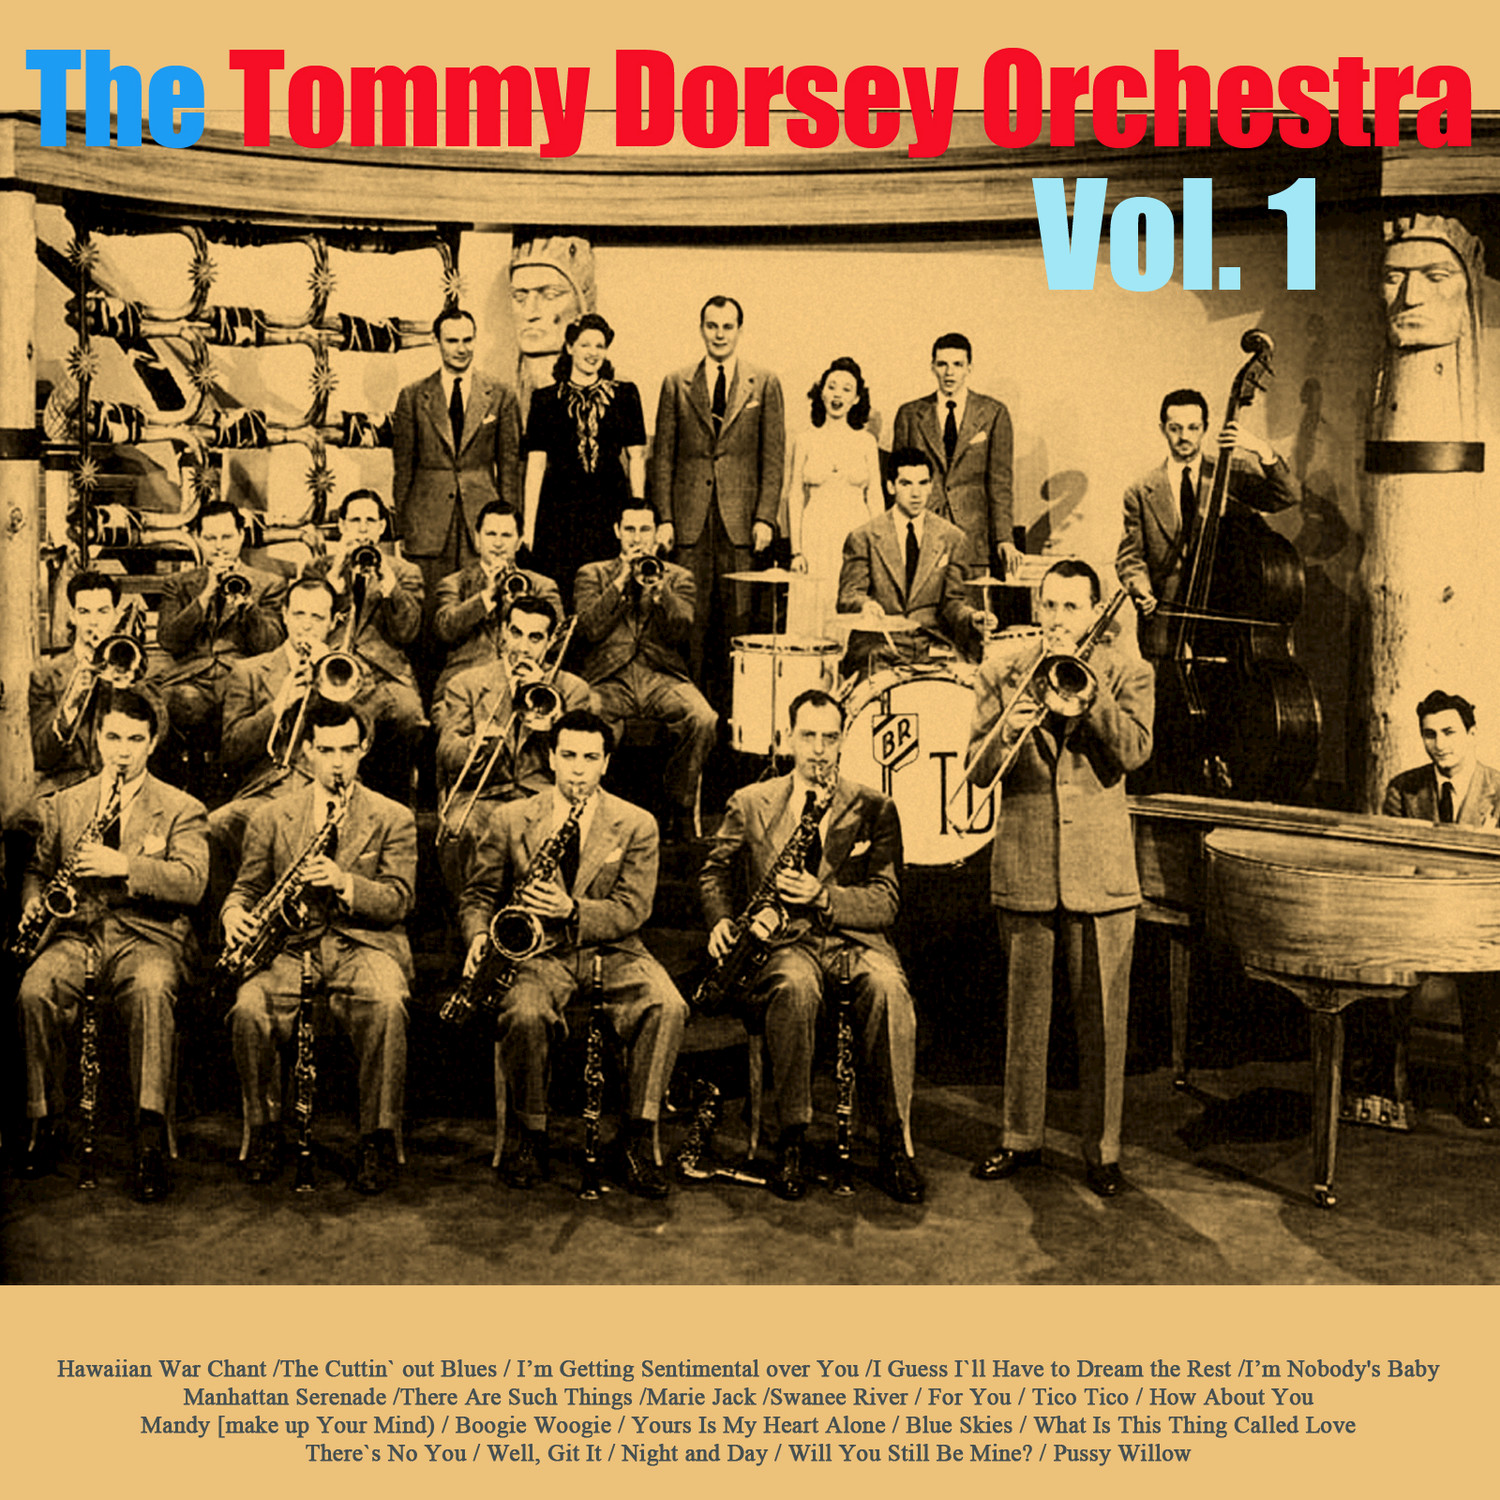 The Tommy Dorsey Orchestra, Vol. 1